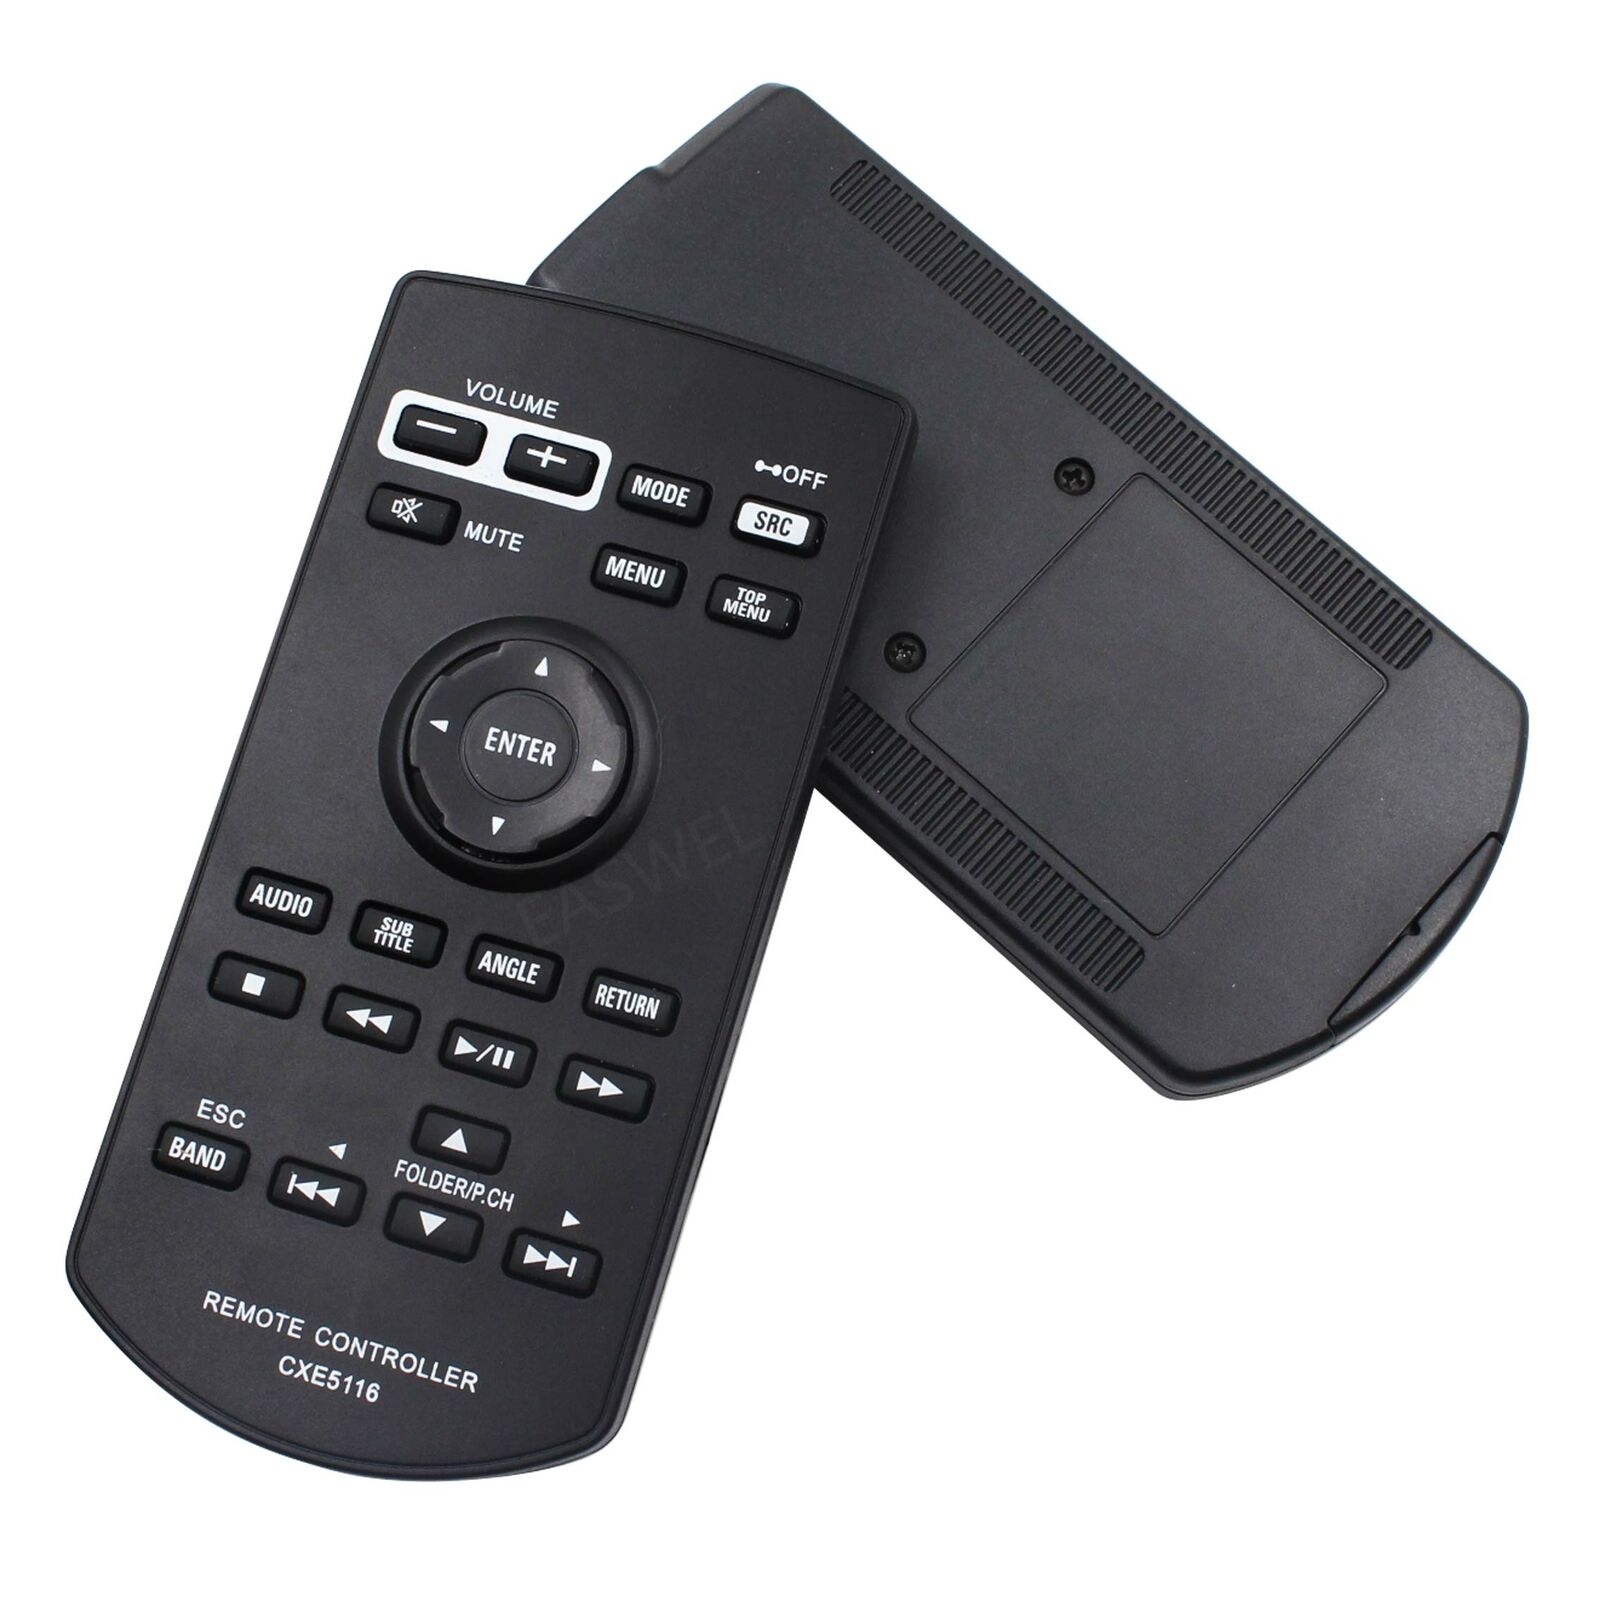 For Pioneer CD-R33 Car Stereo Remote Control for mod AVH- CD Manufacturer regenerated product R33 Virginia Beach Mall